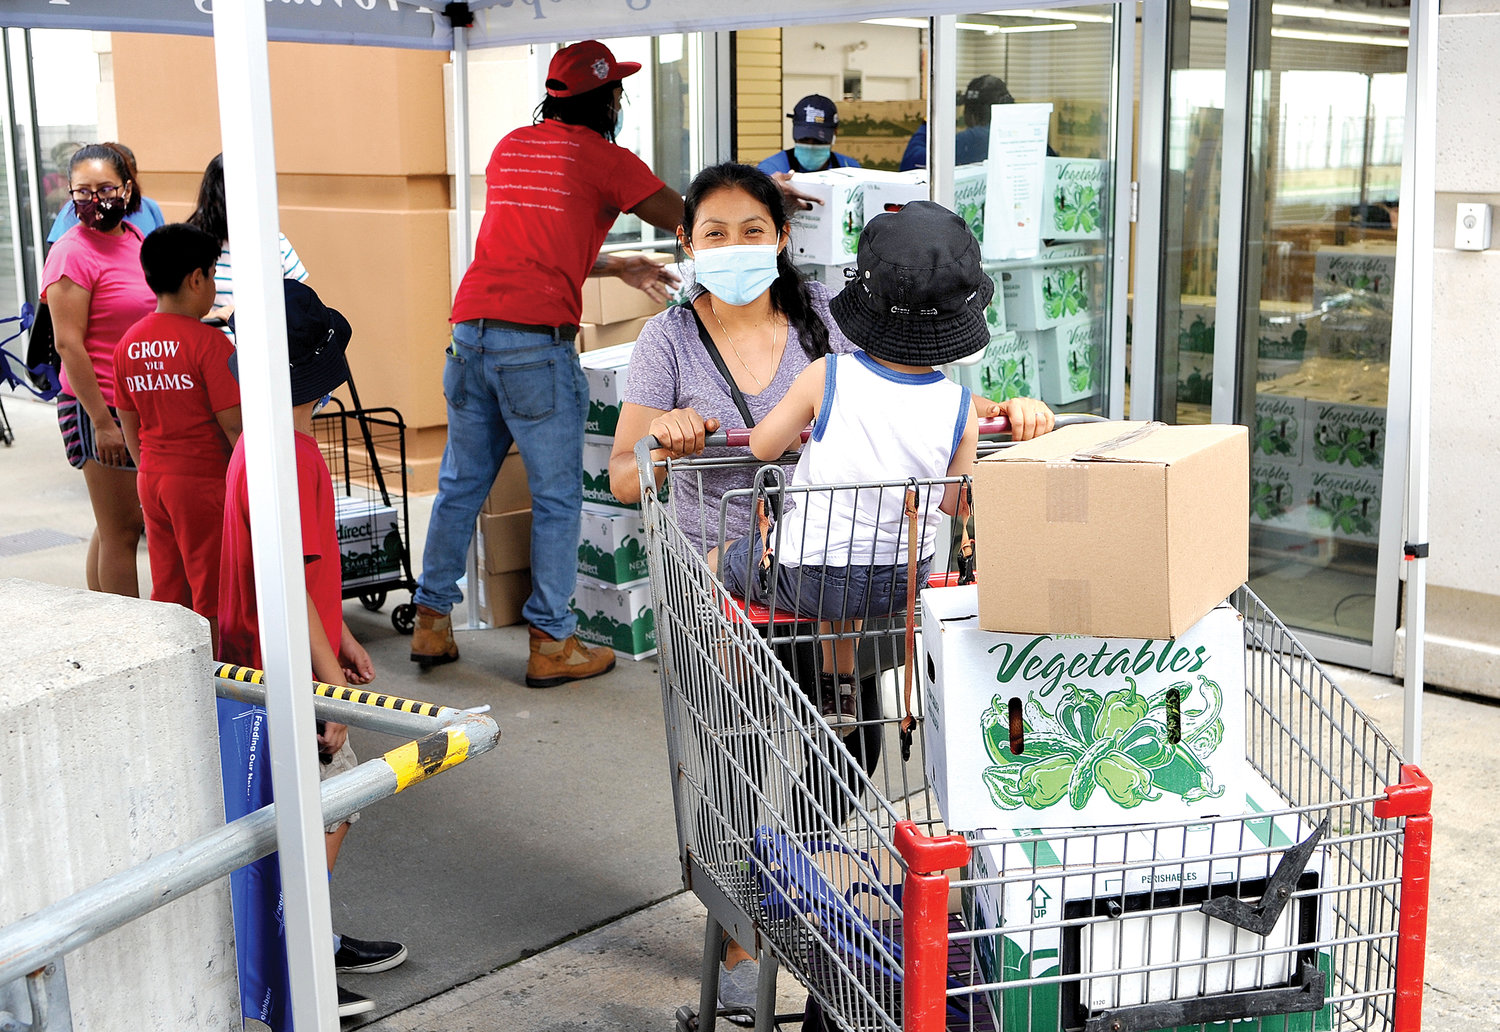 A woman with a young child smiles behind her mask as she fills her cart at the event where 1,000 bags of food and produce and 1,000 gallons of milk were distributed.